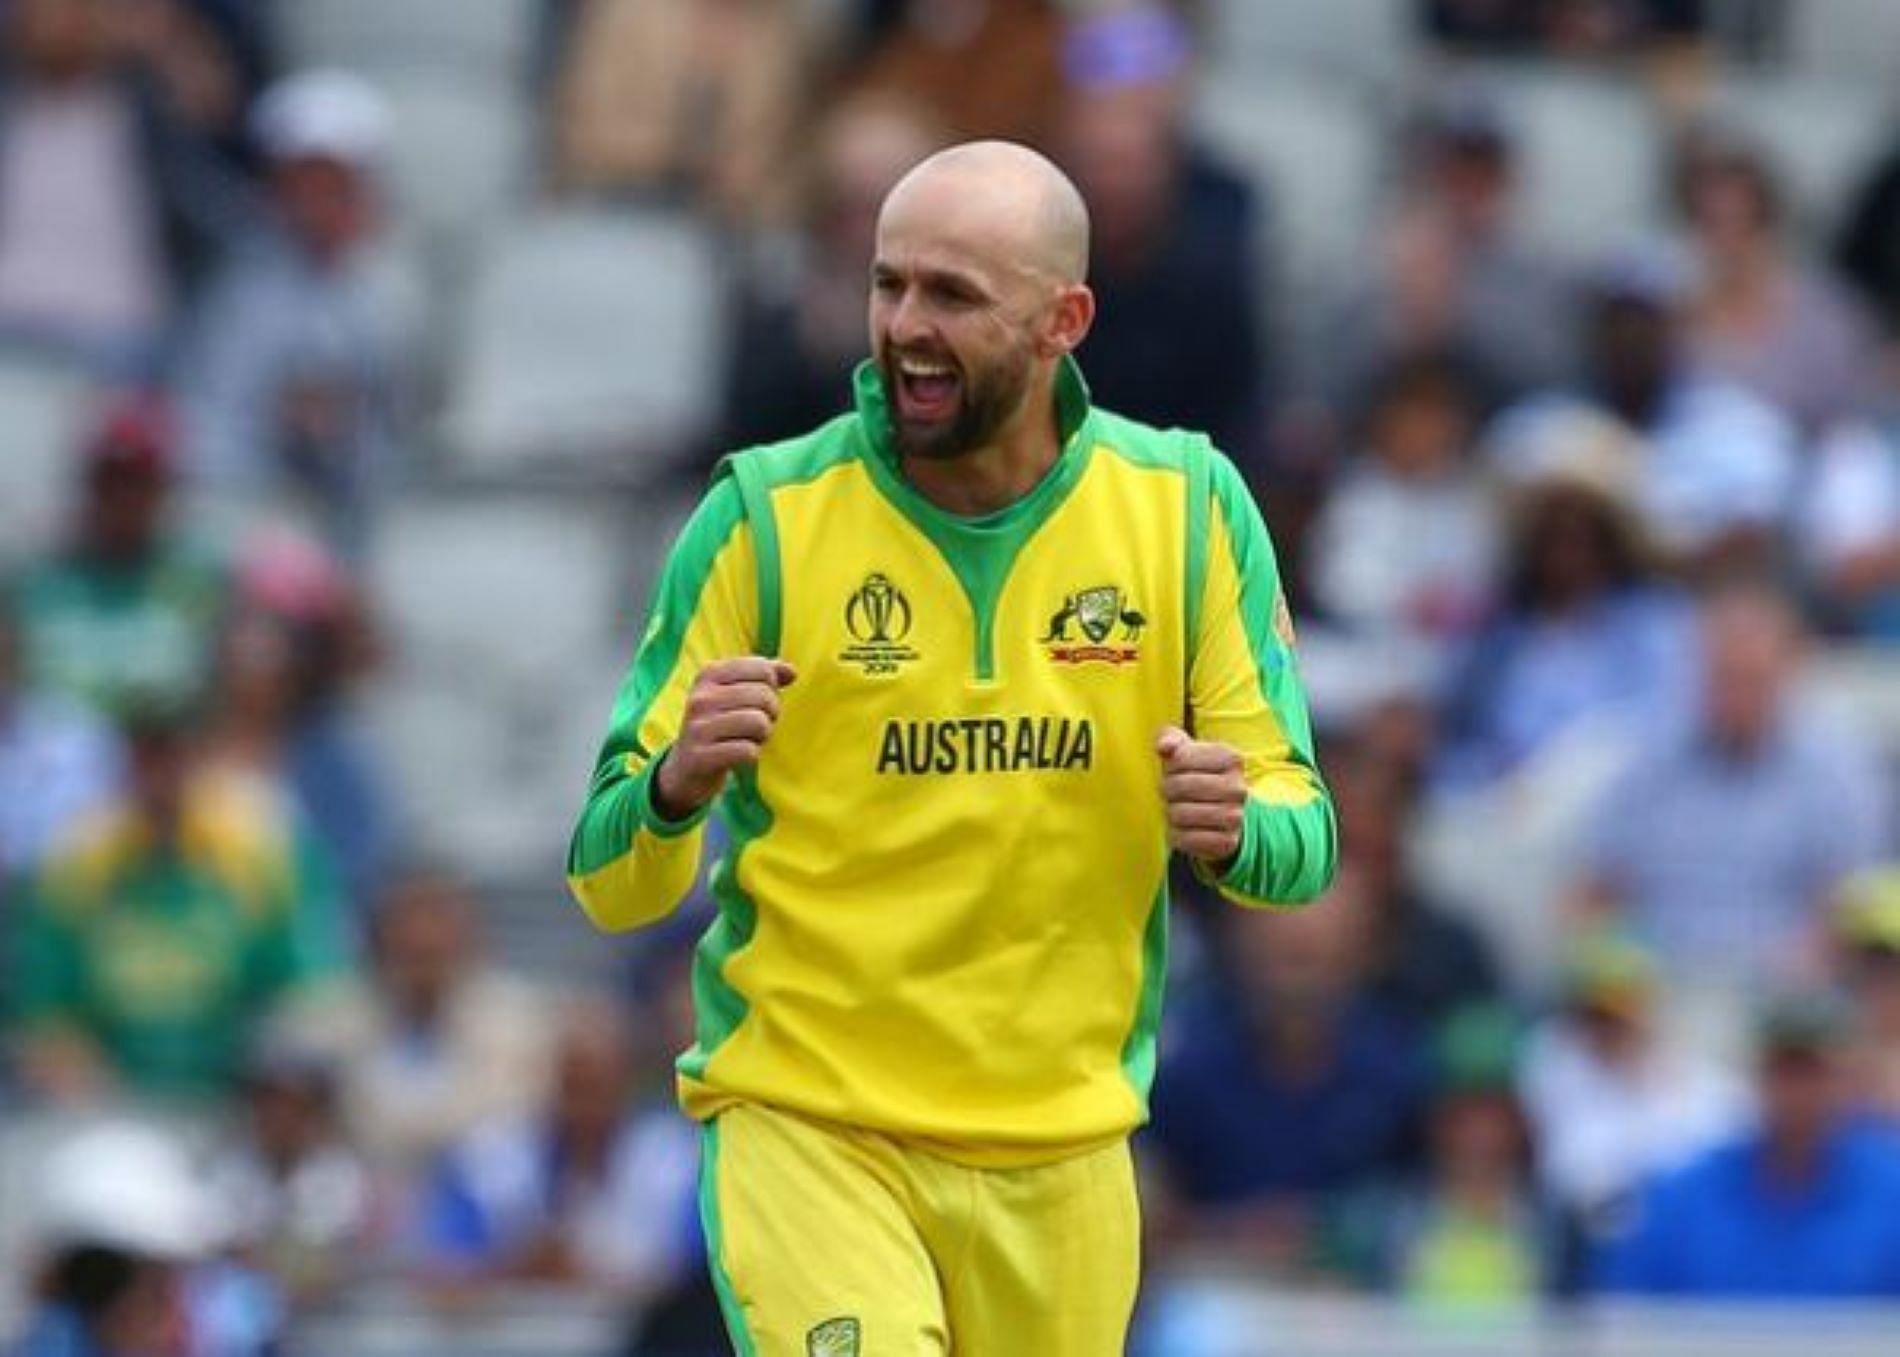 Lyon last played in ODIs during the 2019 World Cup